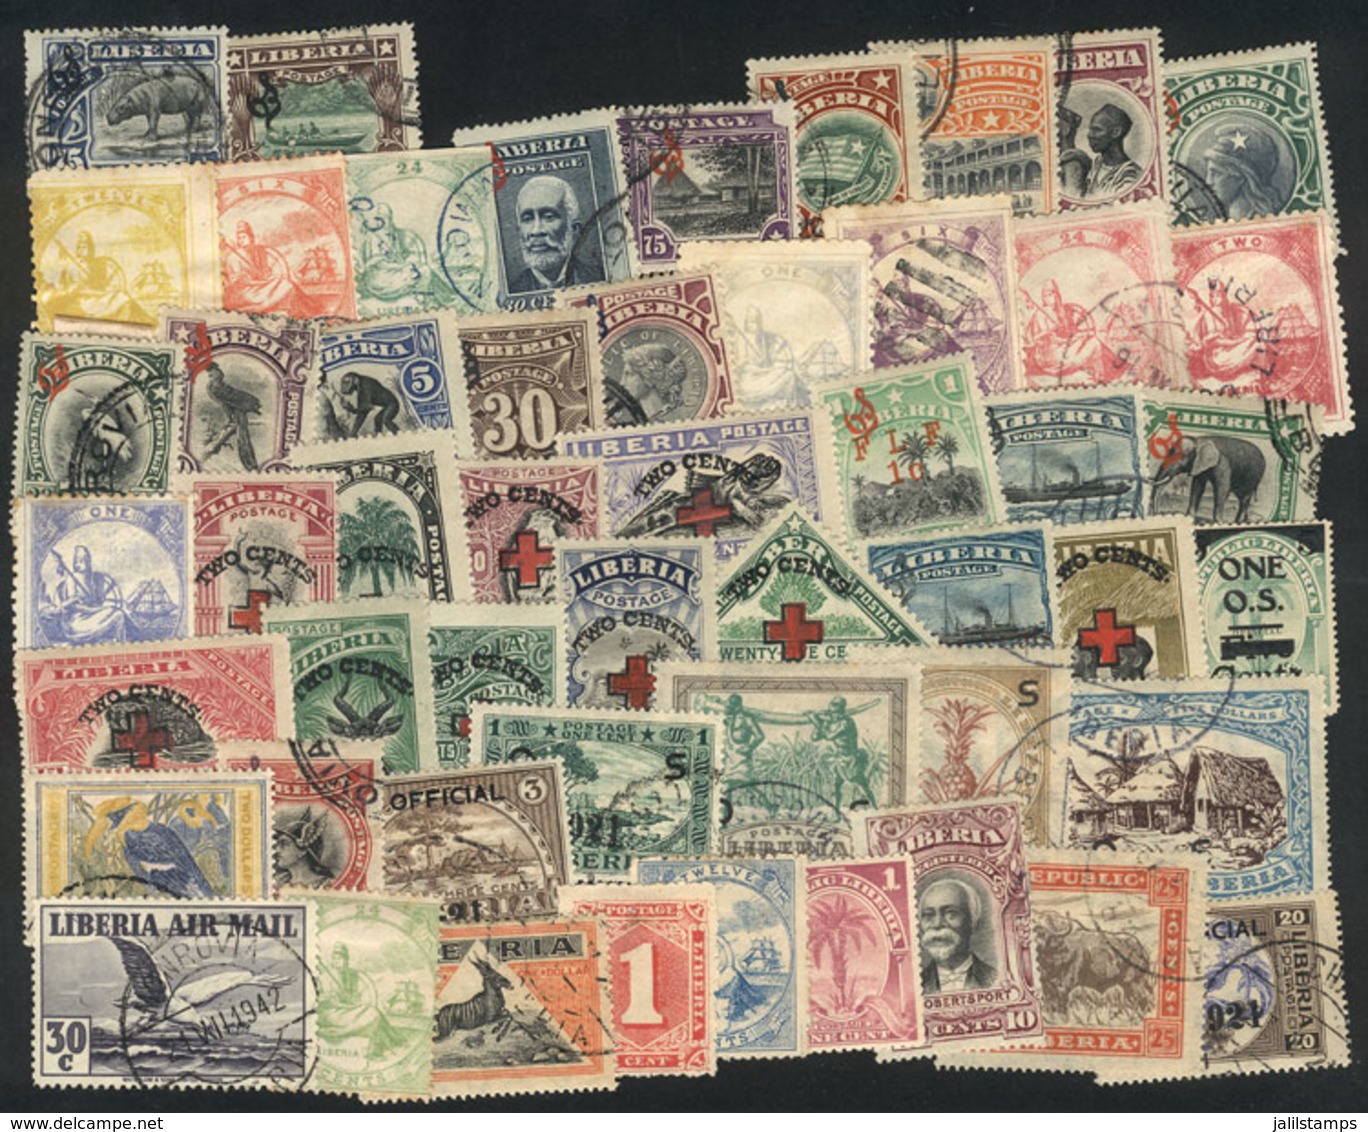 1525 LIBERIA: Interesting Lot Of Used And Mint Stamps (some Can Be Without Gum), Fine General Quality (some May Have Min - Liberia